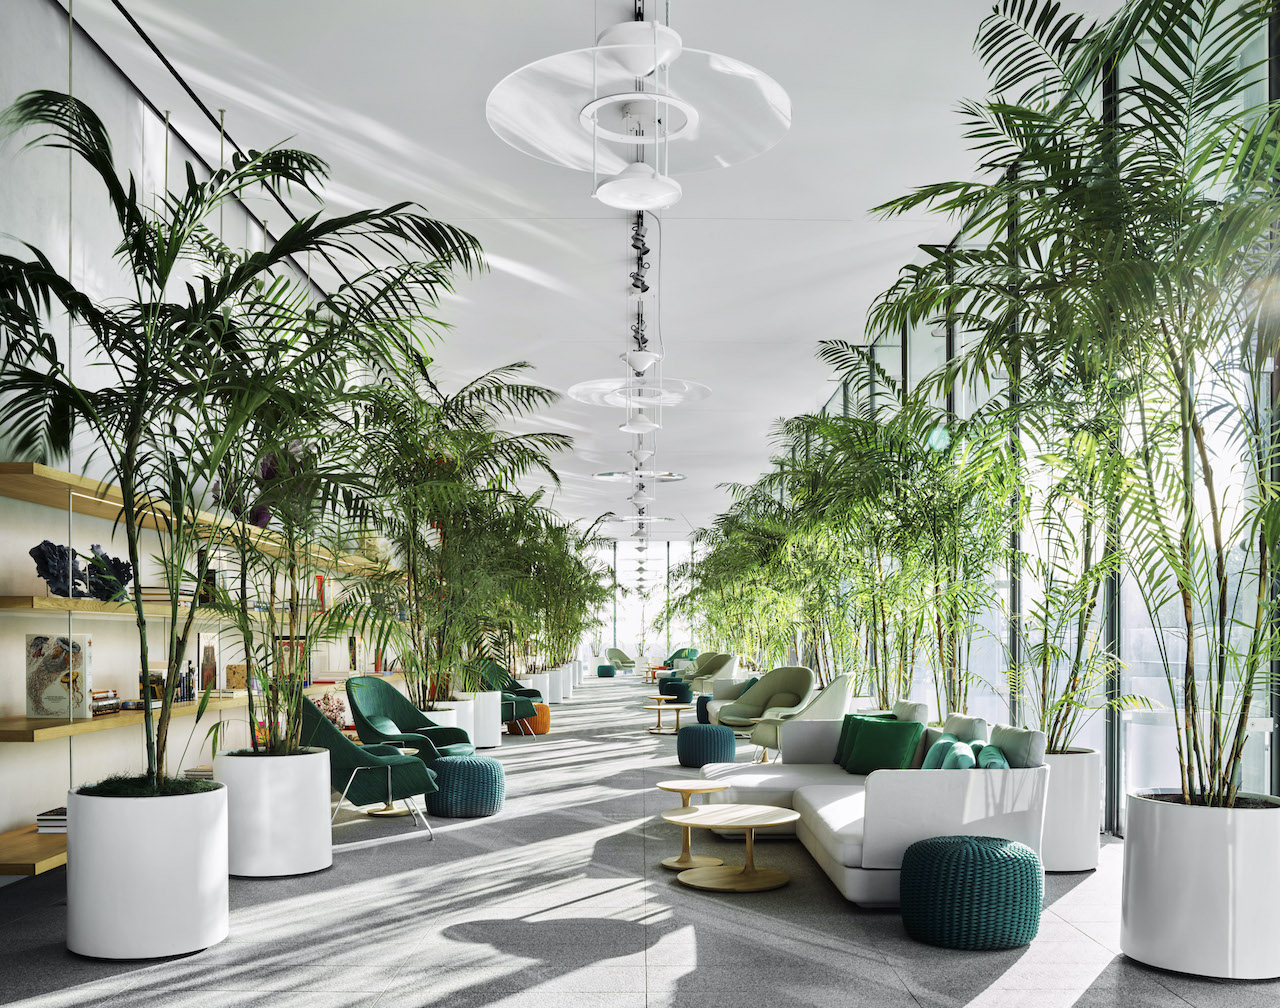 Renzo Piano Building Workshop designed Eighty Seven Park’s lobby interiors, in collaboration with RDAI.